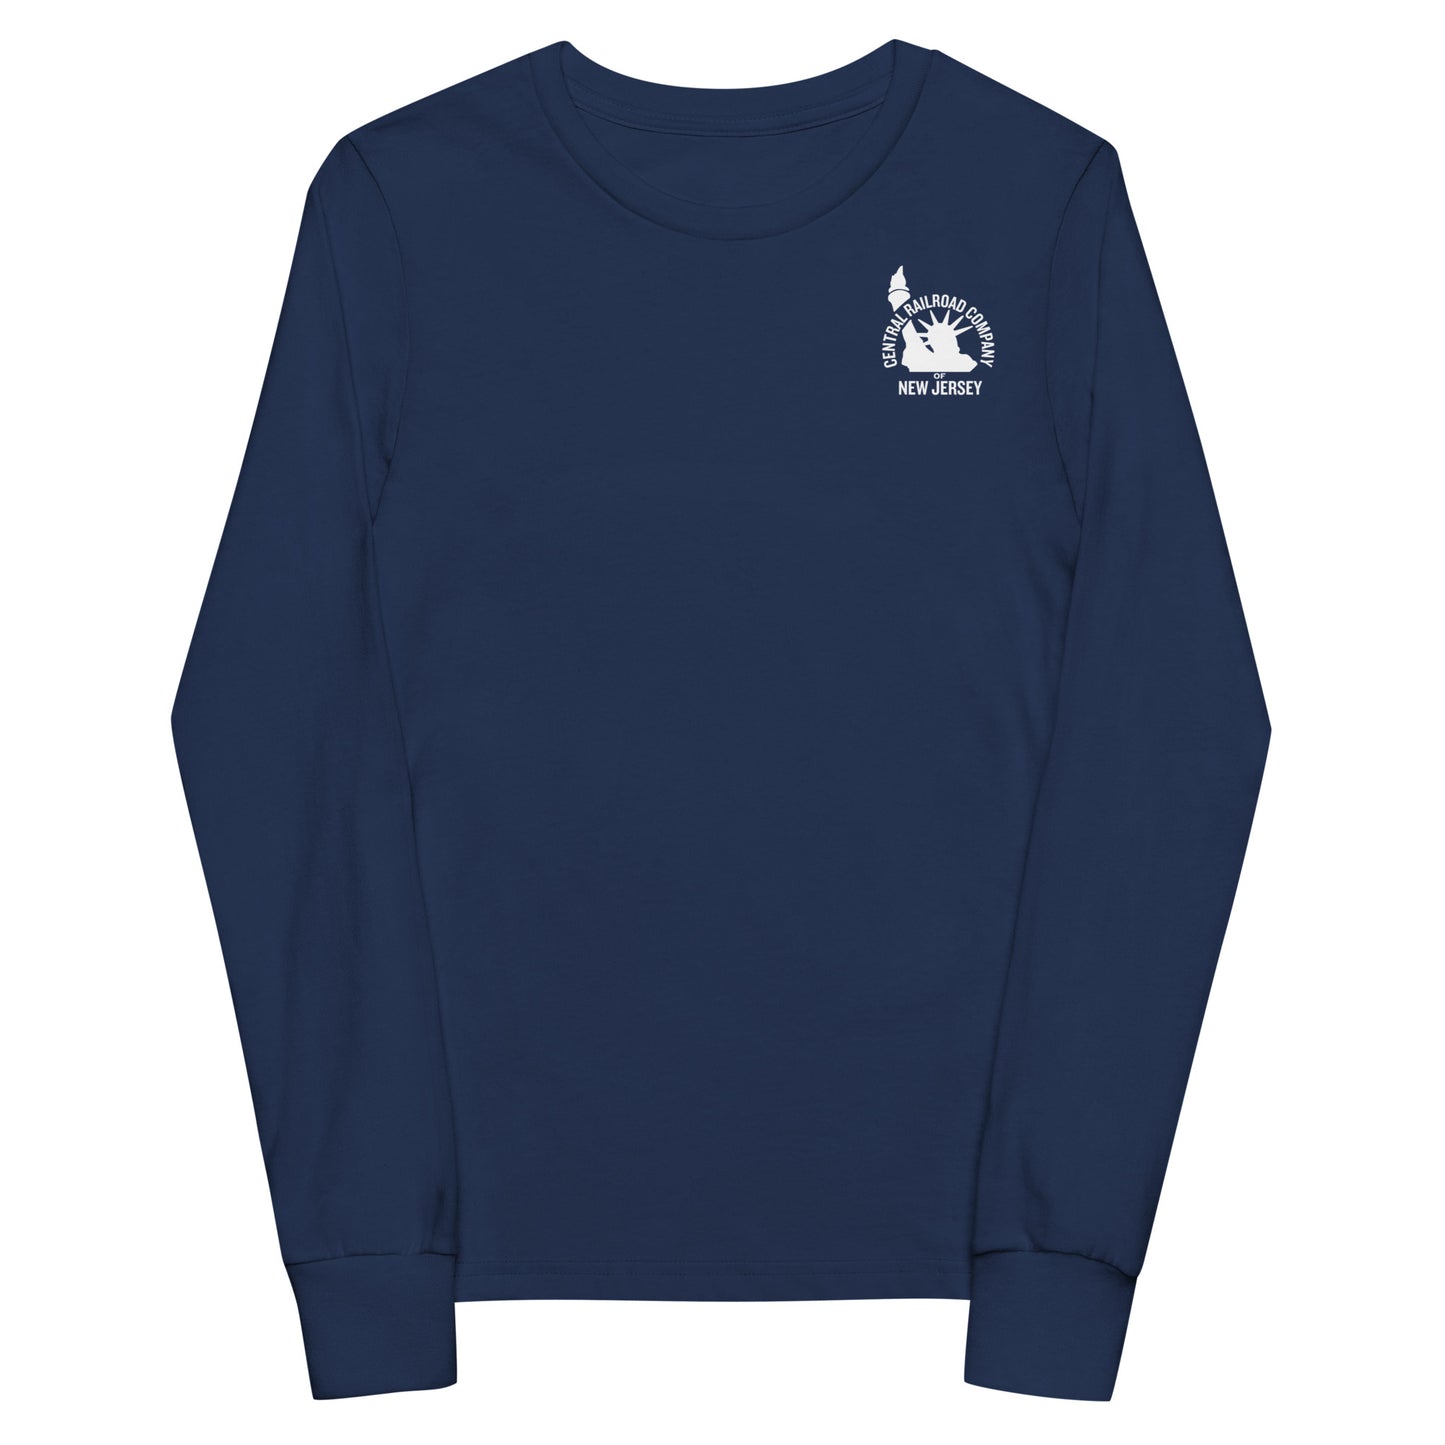 Kid's Central Railroad of New Jersey long sleeve tee